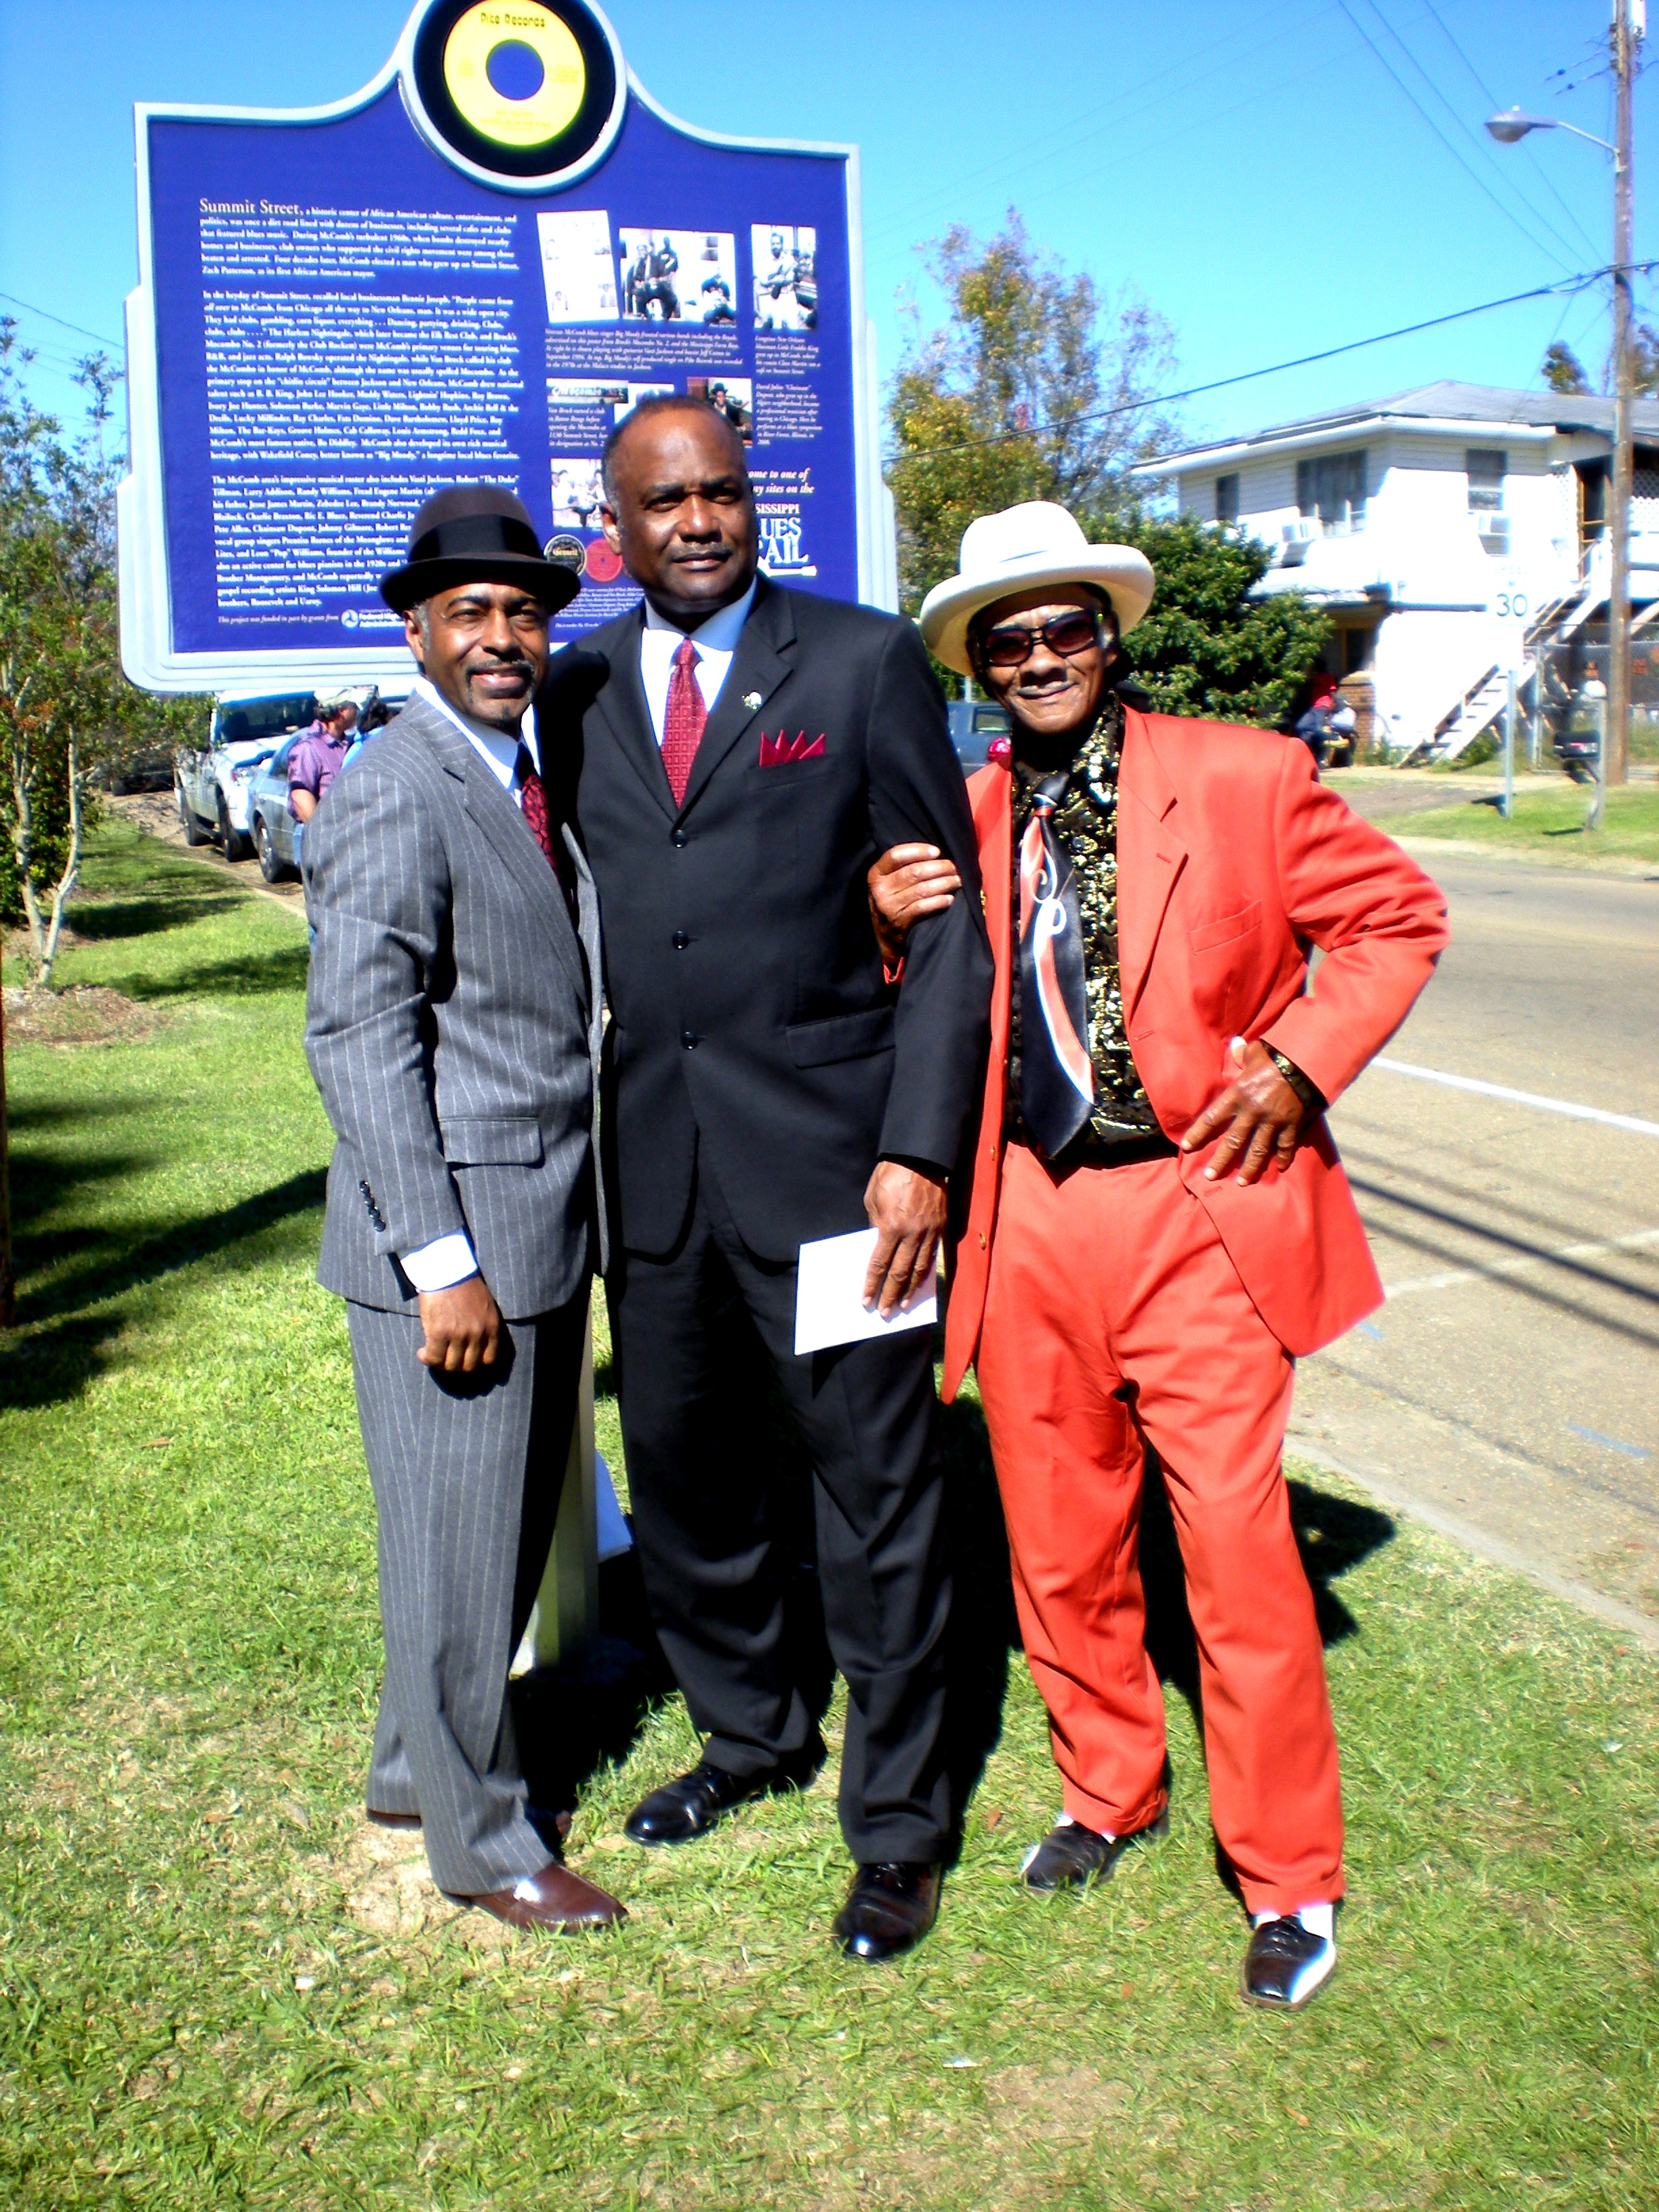 MAYOR ZACHARY PATTERSON PROVIDES A WELCOME HOME TO VASTI JACKSON AND LITTLE FREDDIE KING, 